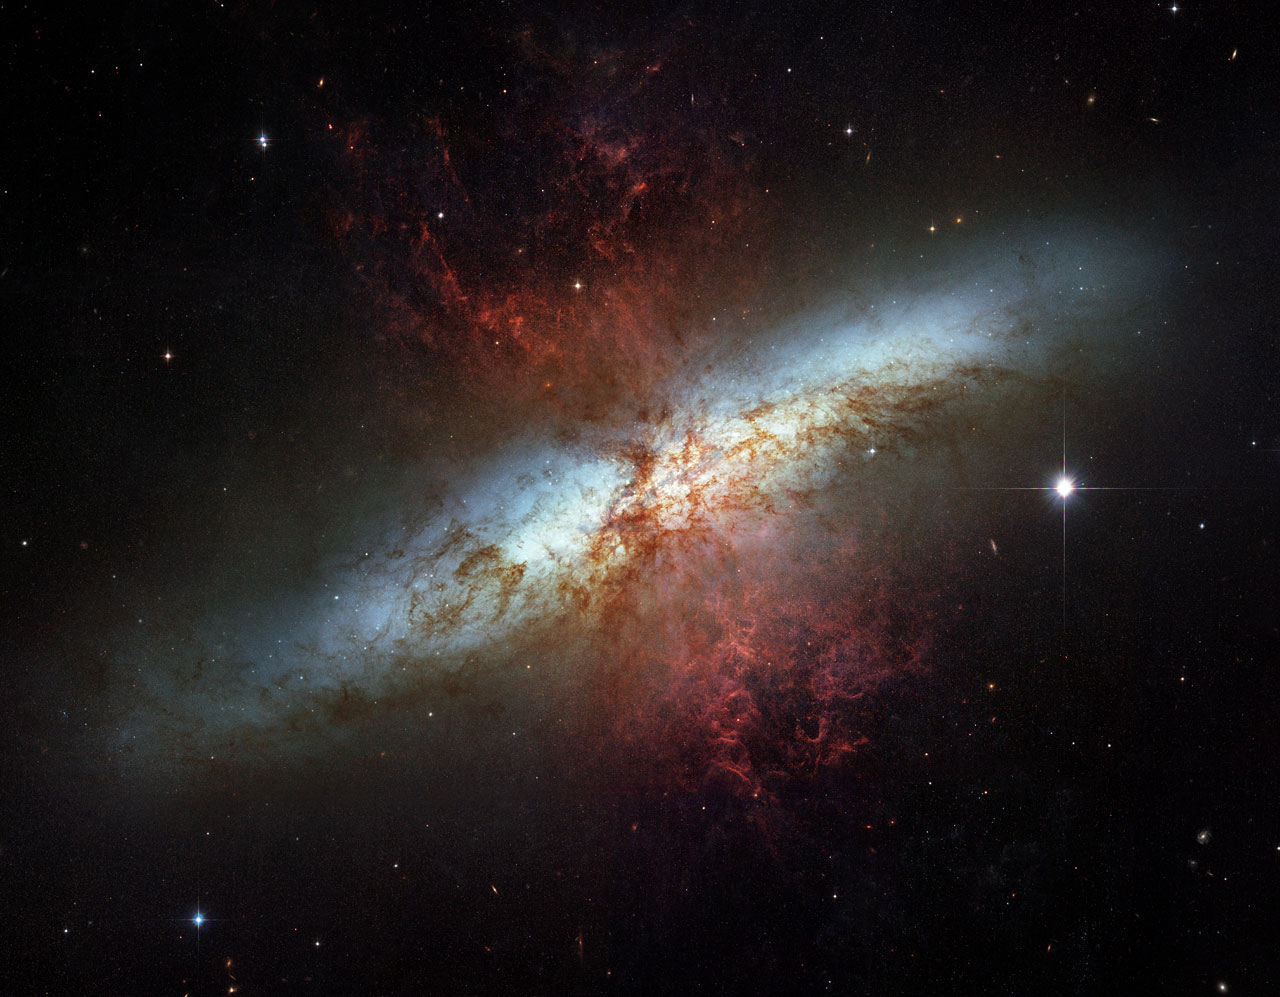 10 years ago the NASA-ESA Hubble celebrated its first 16 years of success by releasing this mosaic image of the magnificent starburst galaxy, Messier 82, also situated on Ursa Major, image via NASA, ESA and the Hubble Heritage Team (STScI)